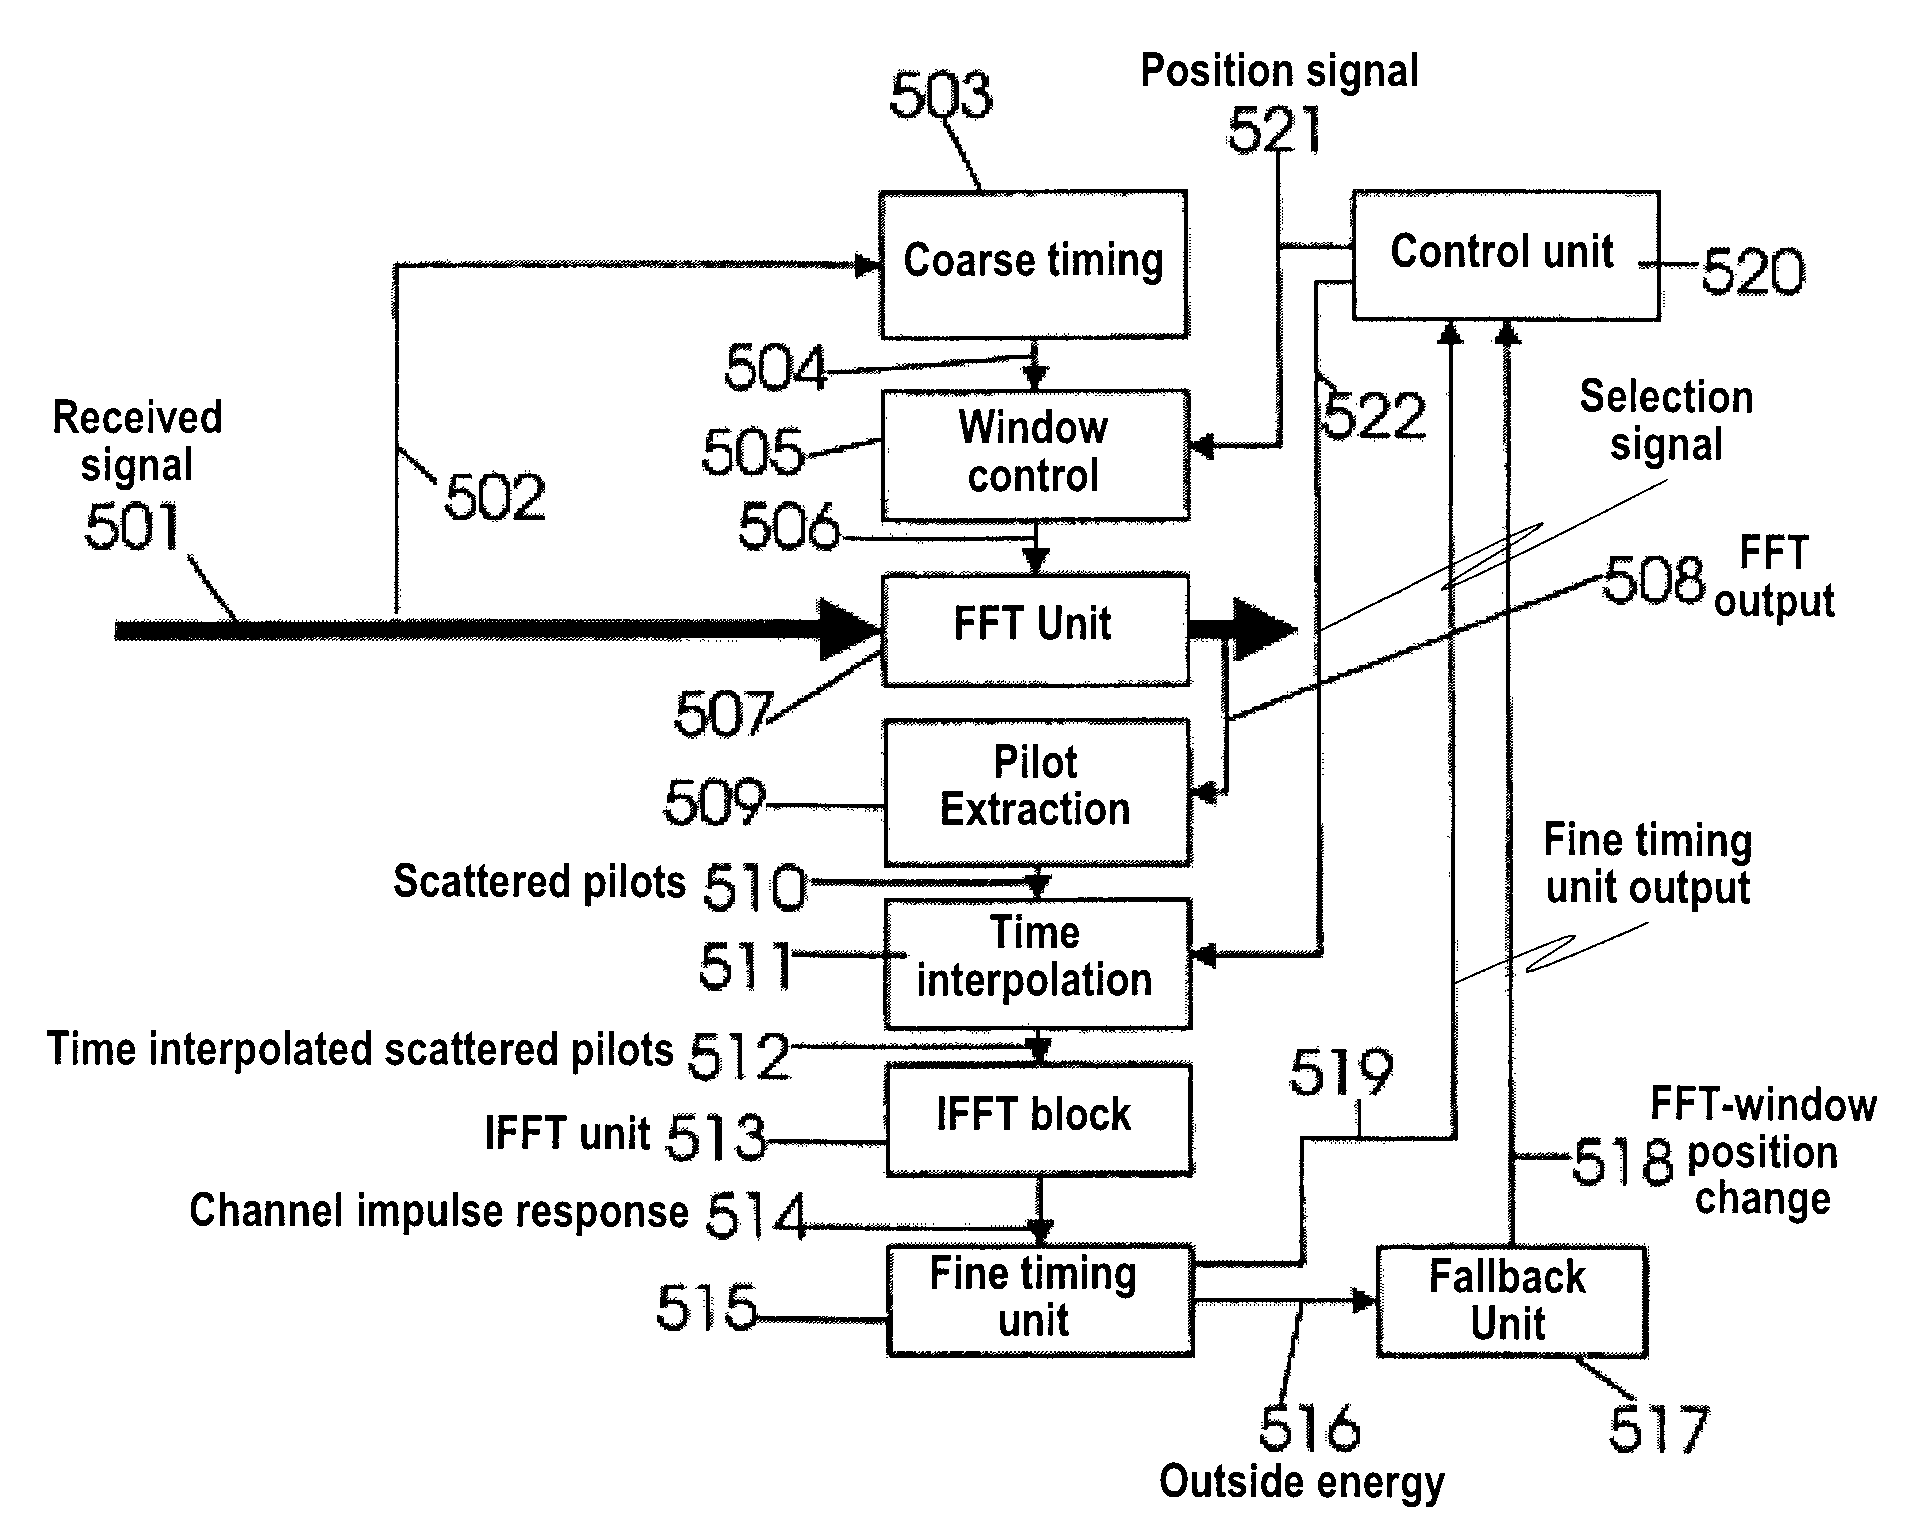 Faster fine timing operation in multi-carrier system